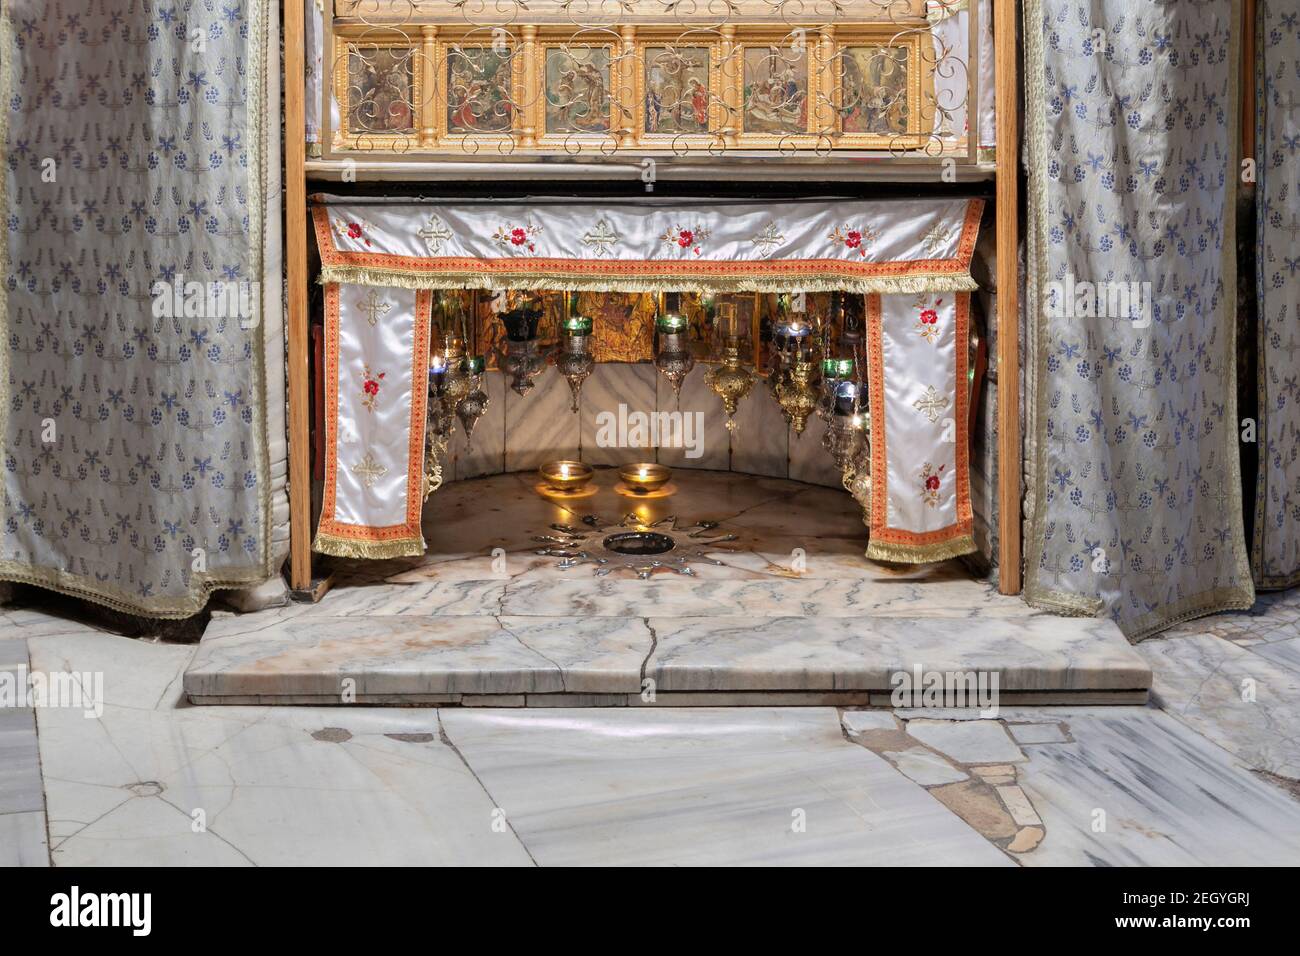 Church of the nativity, the star that indicates the site where Jesus Christ was born, Bethlehem, Palestine Stock Photo